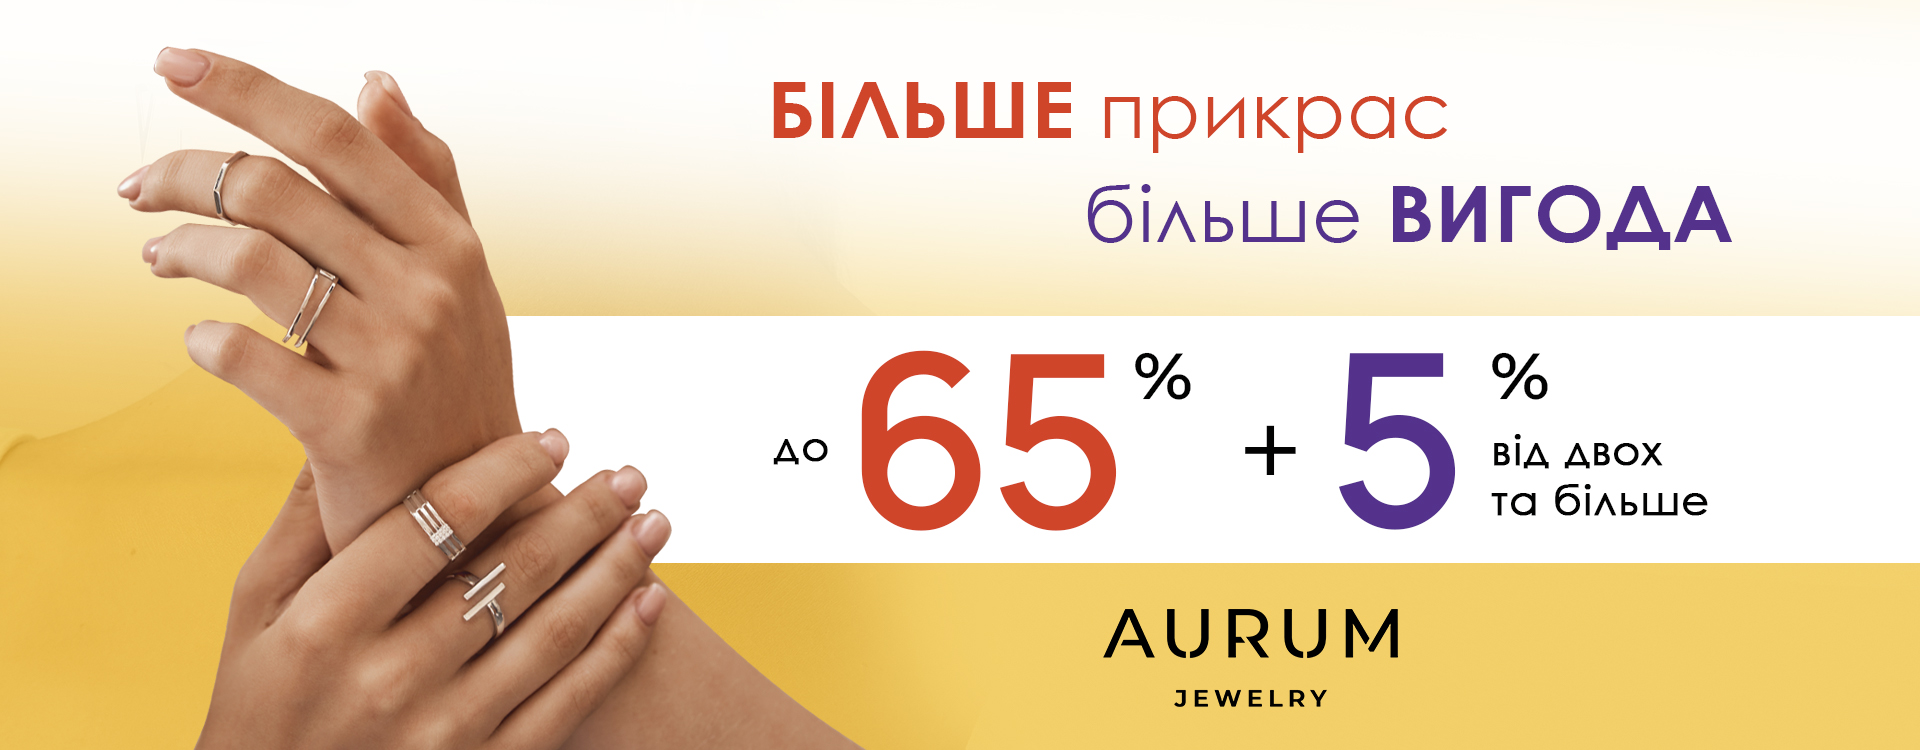 Discounts of up to -65% on jewelry from AURUM